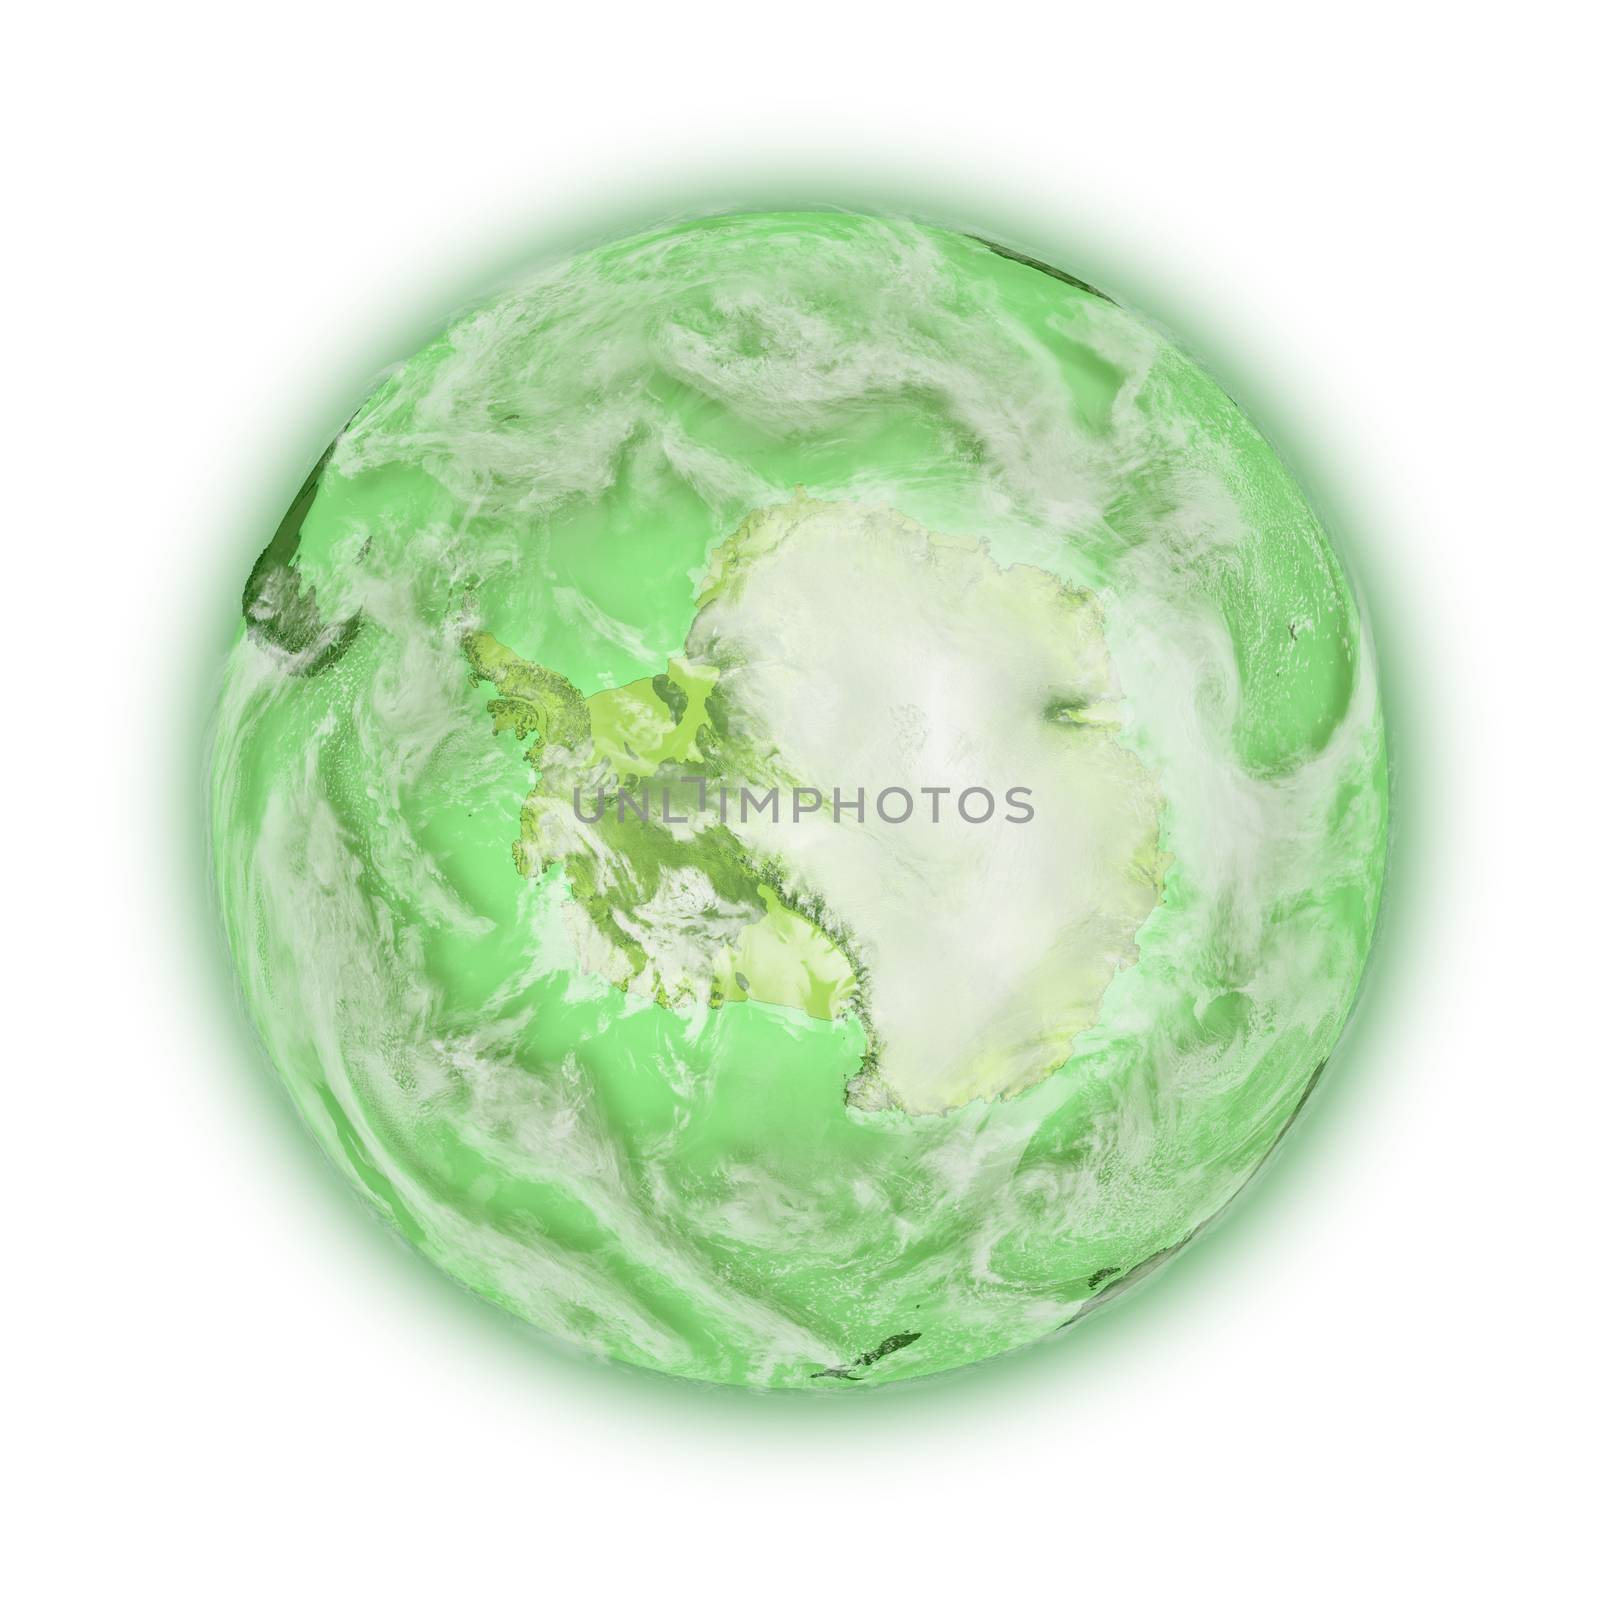 Antarctica on green planet Earth isolated on white background. Highly detailed planet surface. Elements of this image furnished by NASA.